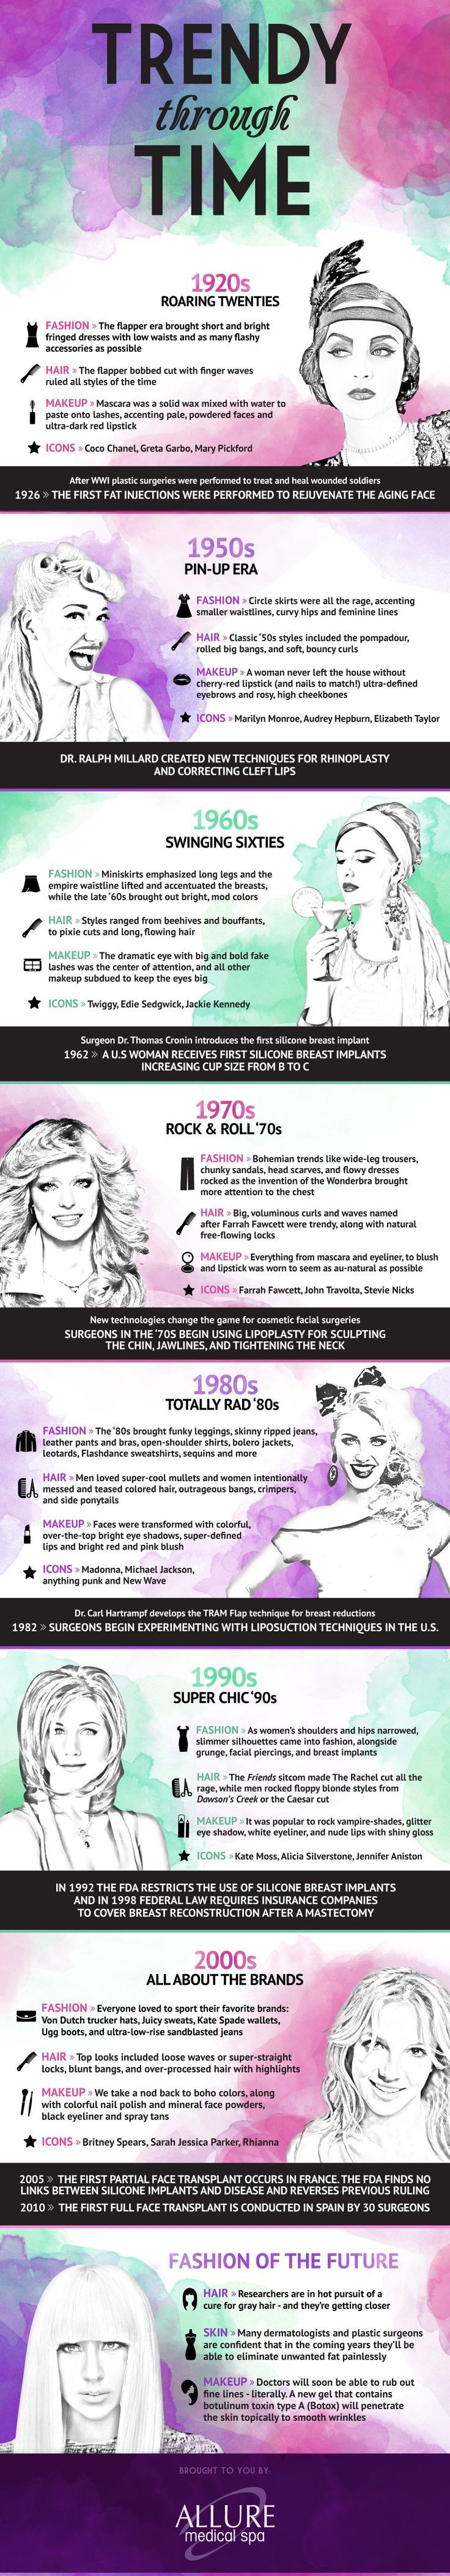 Women’s Makeup And Fashion Style Through The Years | Fashion Trends - Beauty T...